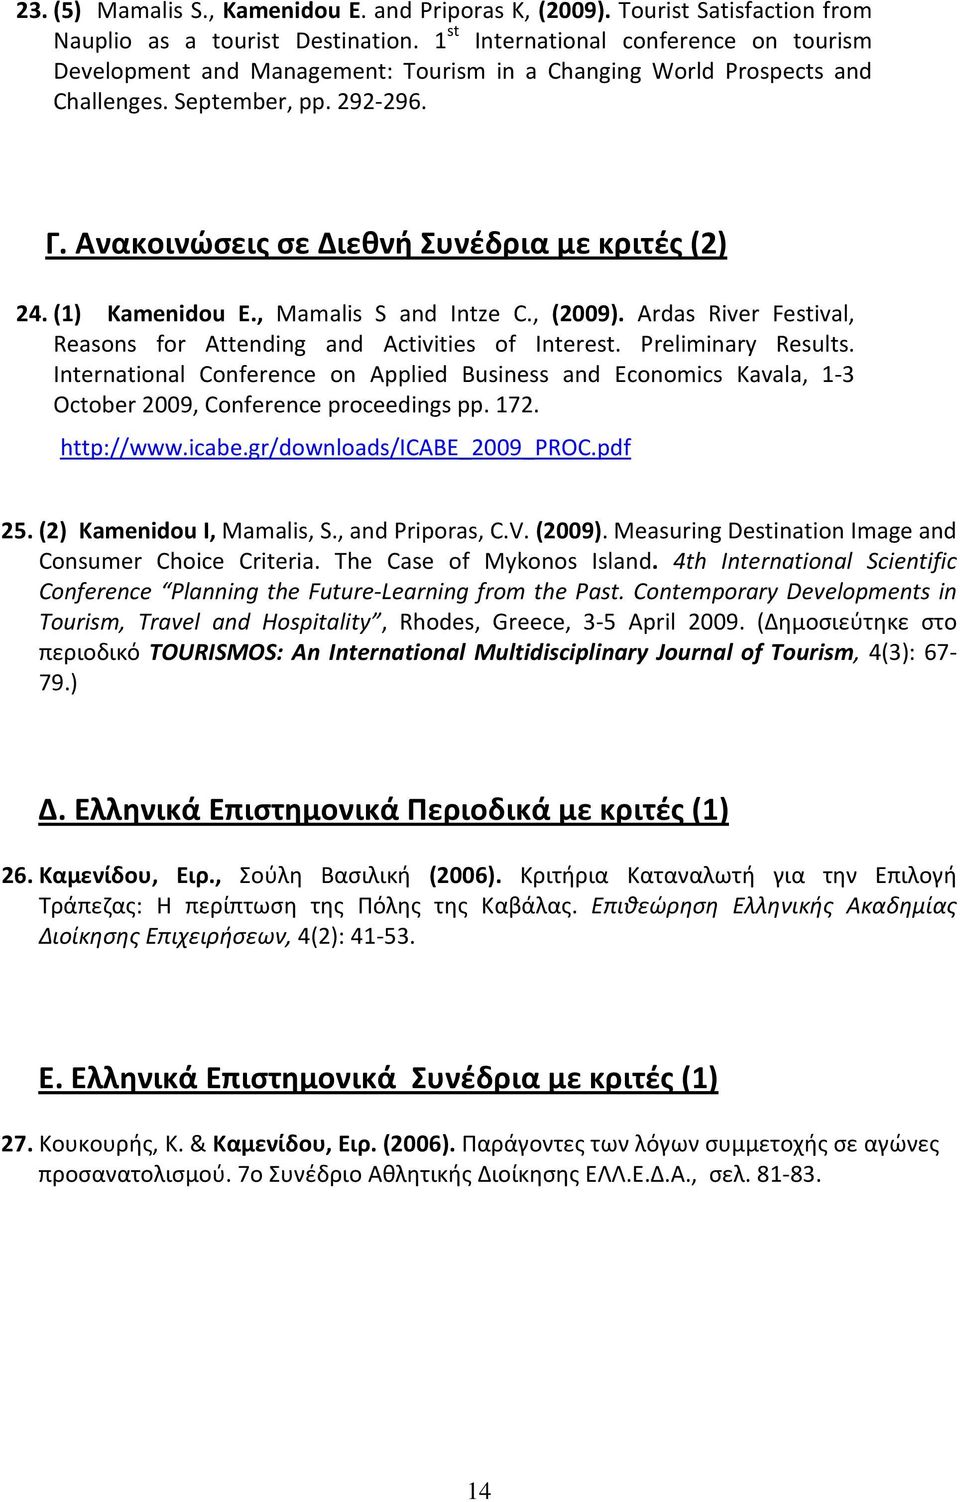 (1) Kamenidou E., Mamalis S and Intze C., (2009). Ardas River Festival, Reasons for Attending and Activities of Interest. Preliminary Results.